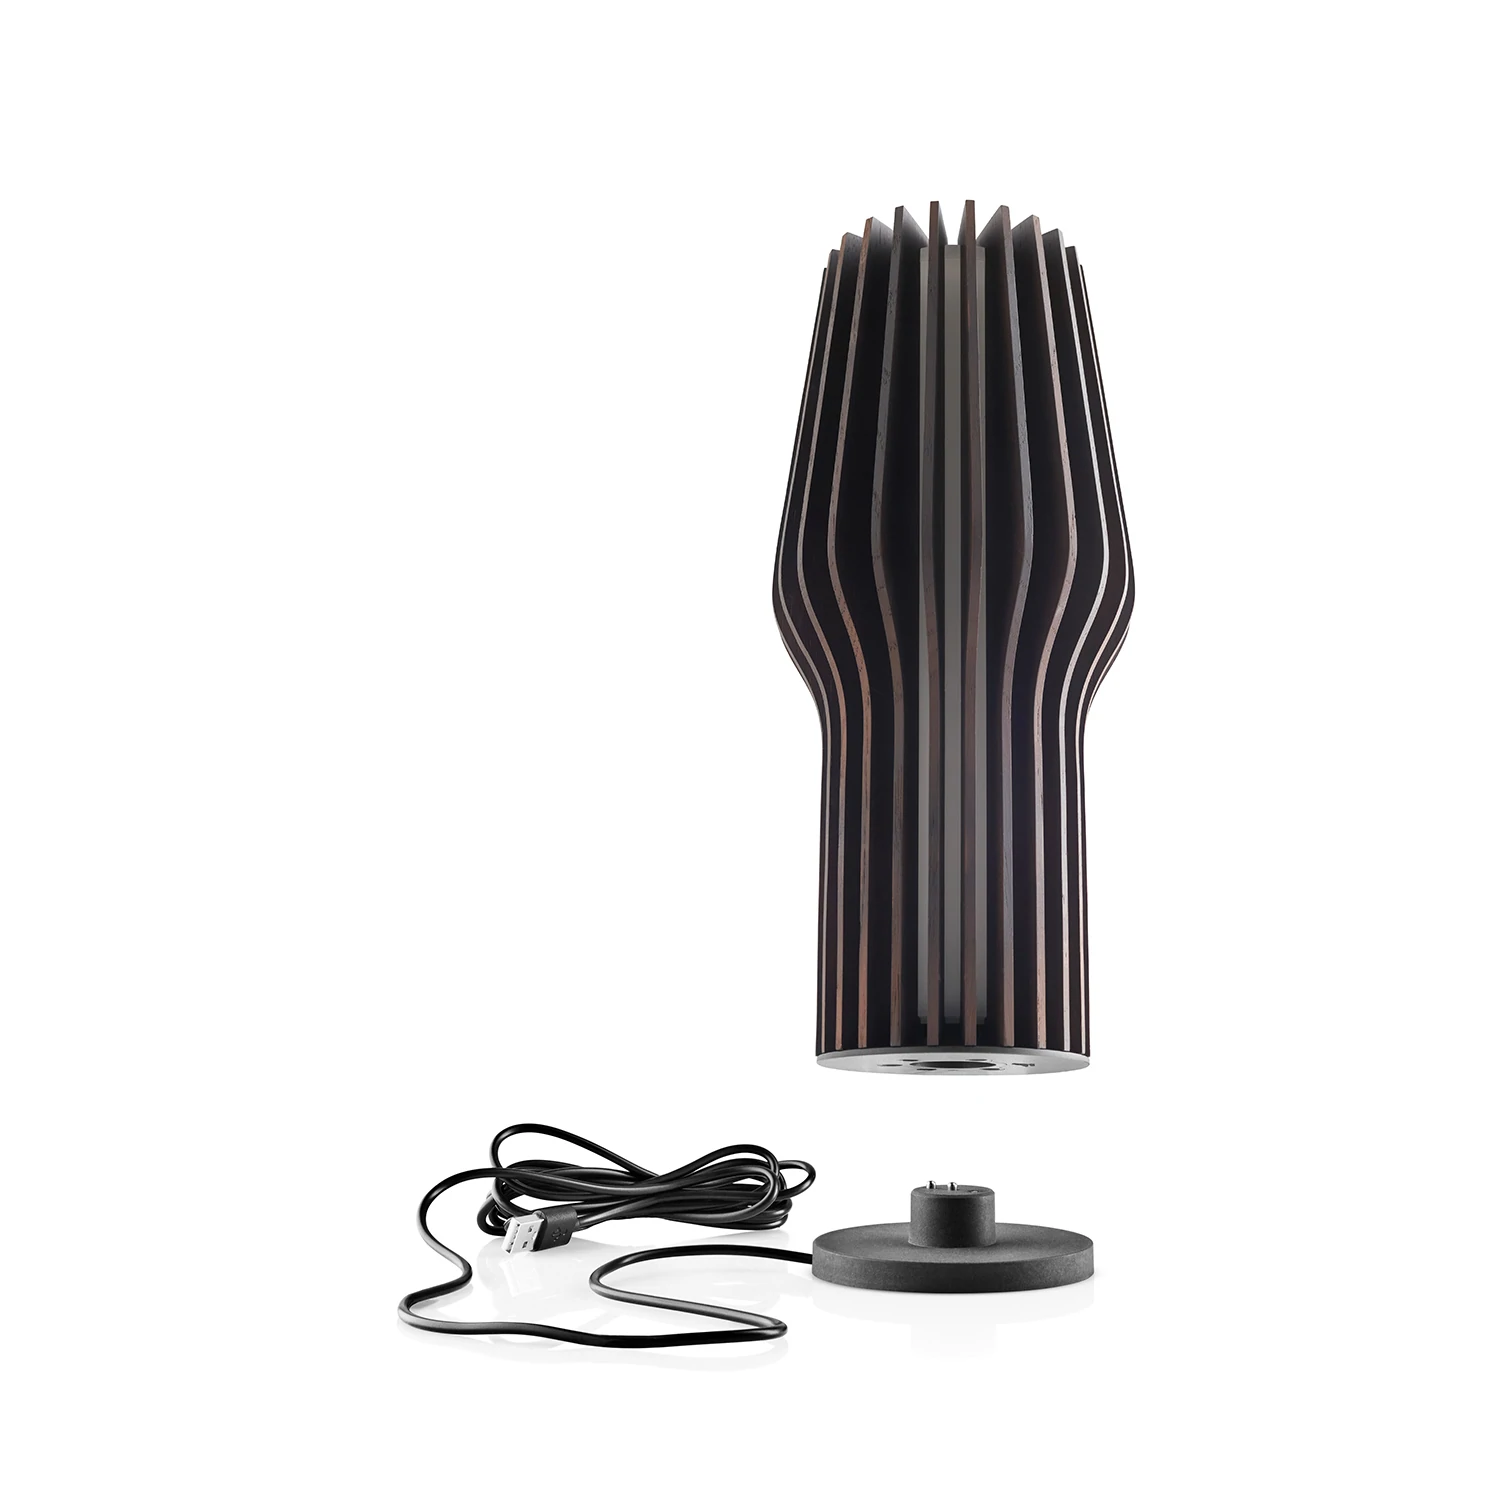 Buy Eva Solo Radiant Table Lamp in Smoke Table Lamps Add a touch of hygge to any space with the Eva Solo Cordless Table Lamp. Featuring a smoke-coloured design, this lamp is ideal for brightening up shelves, balconies, and patios without the hassle of cor